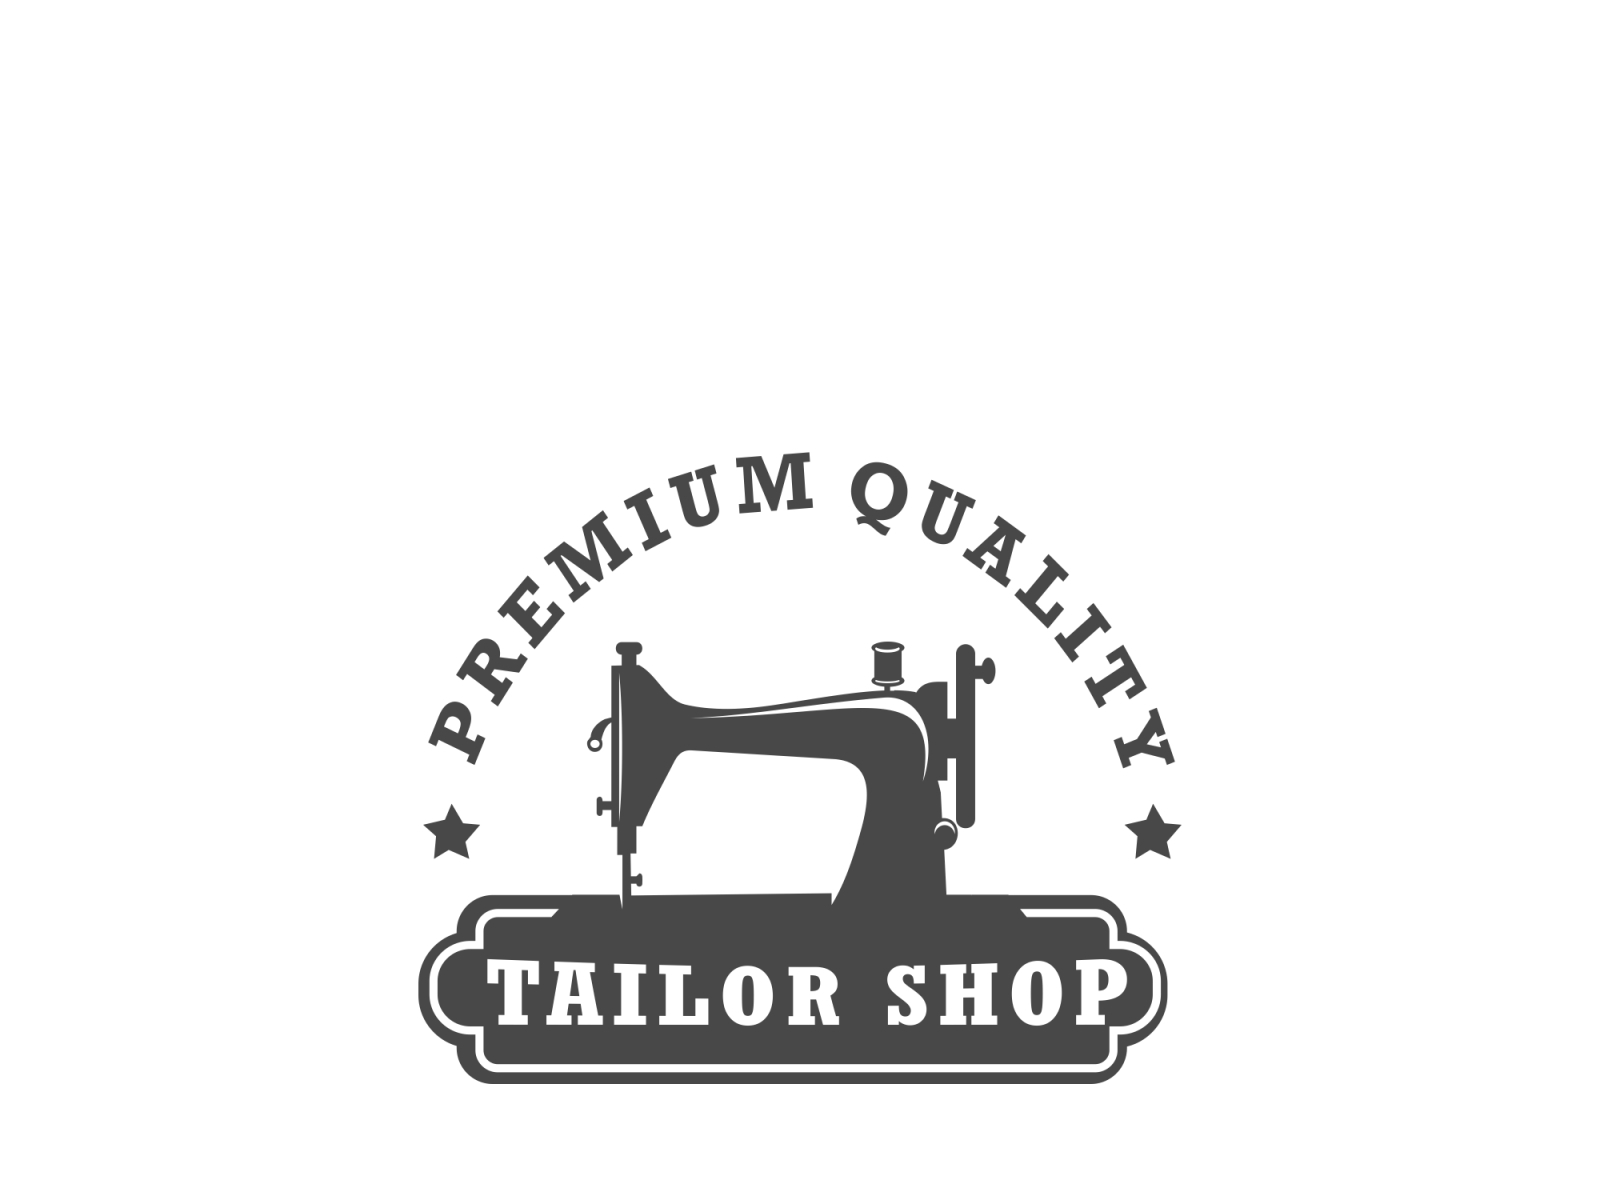 Tailor by Adnan_94 on Dribbble